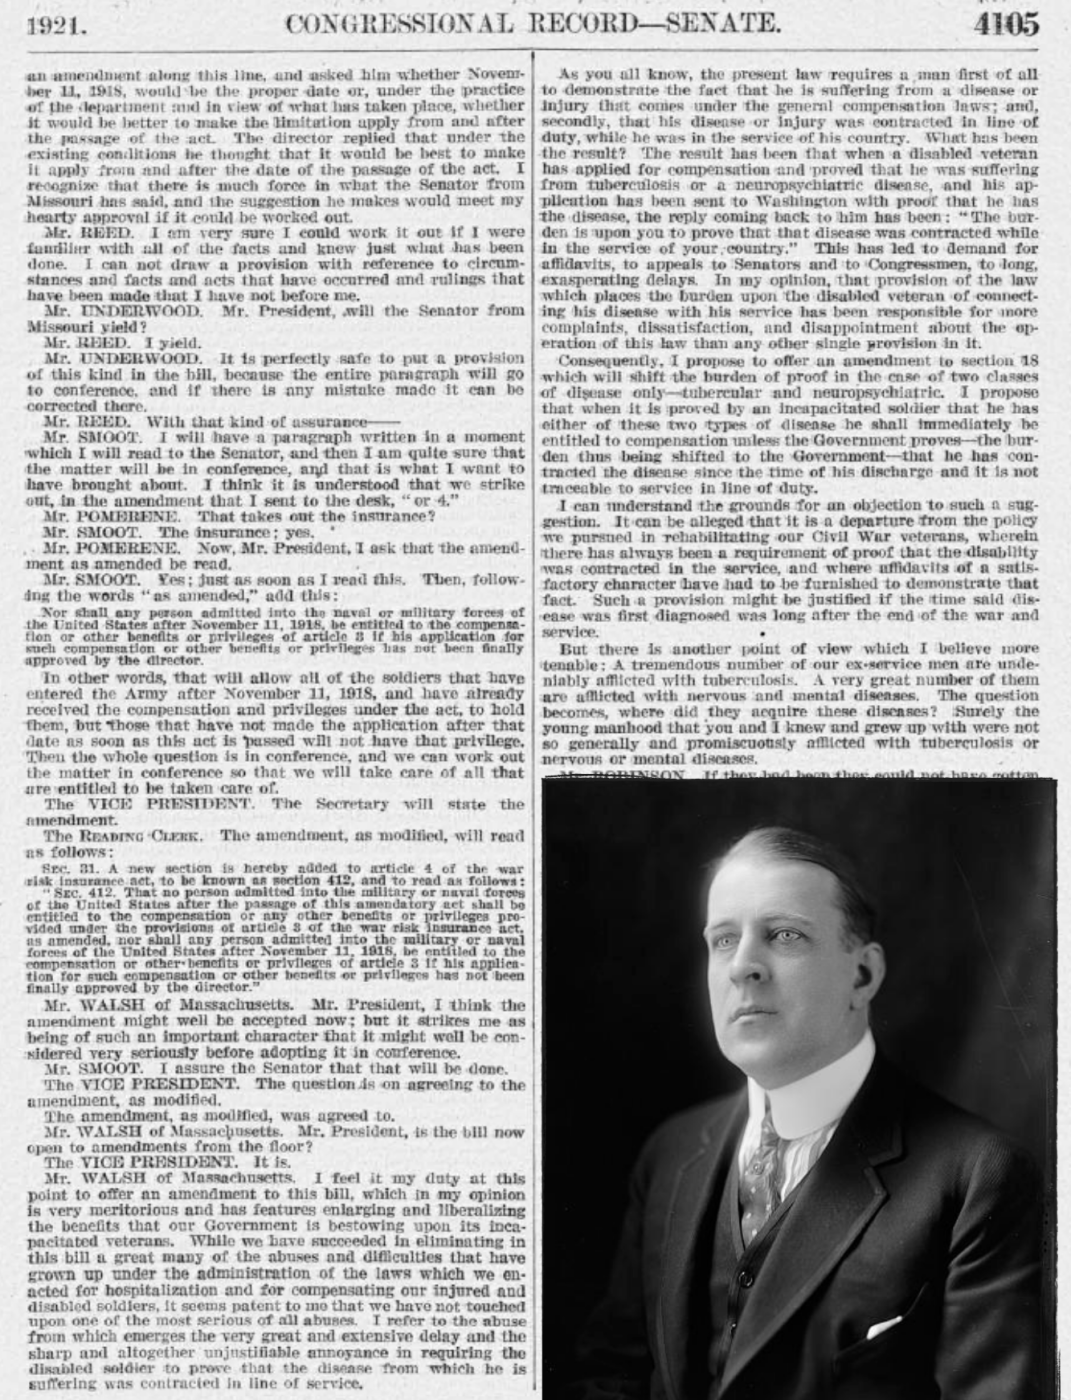 Page from 1921 Congressional Record with Senator David Walsh’s speech highlighted proposing to treat tuberculosis and neuropsychiatric disorders as automatically service connected for compensation purposes. Inset: Walsh in an undated photo. (congress.gov; Library of Congress)